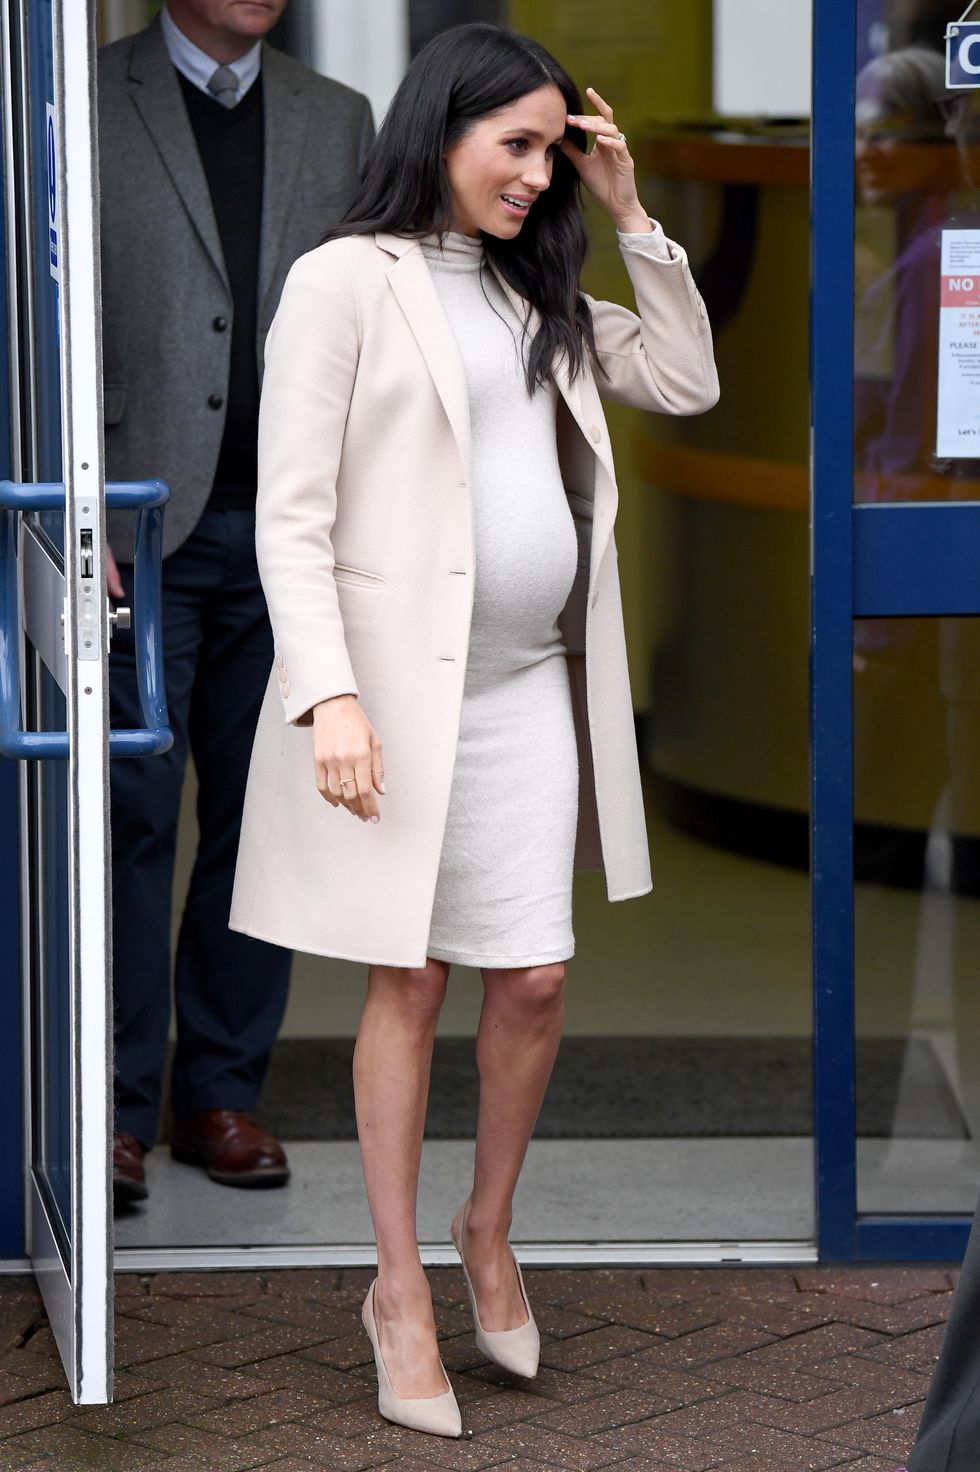 The Duchess Of Sussex Visits Mayhew Animal Welfare Charity